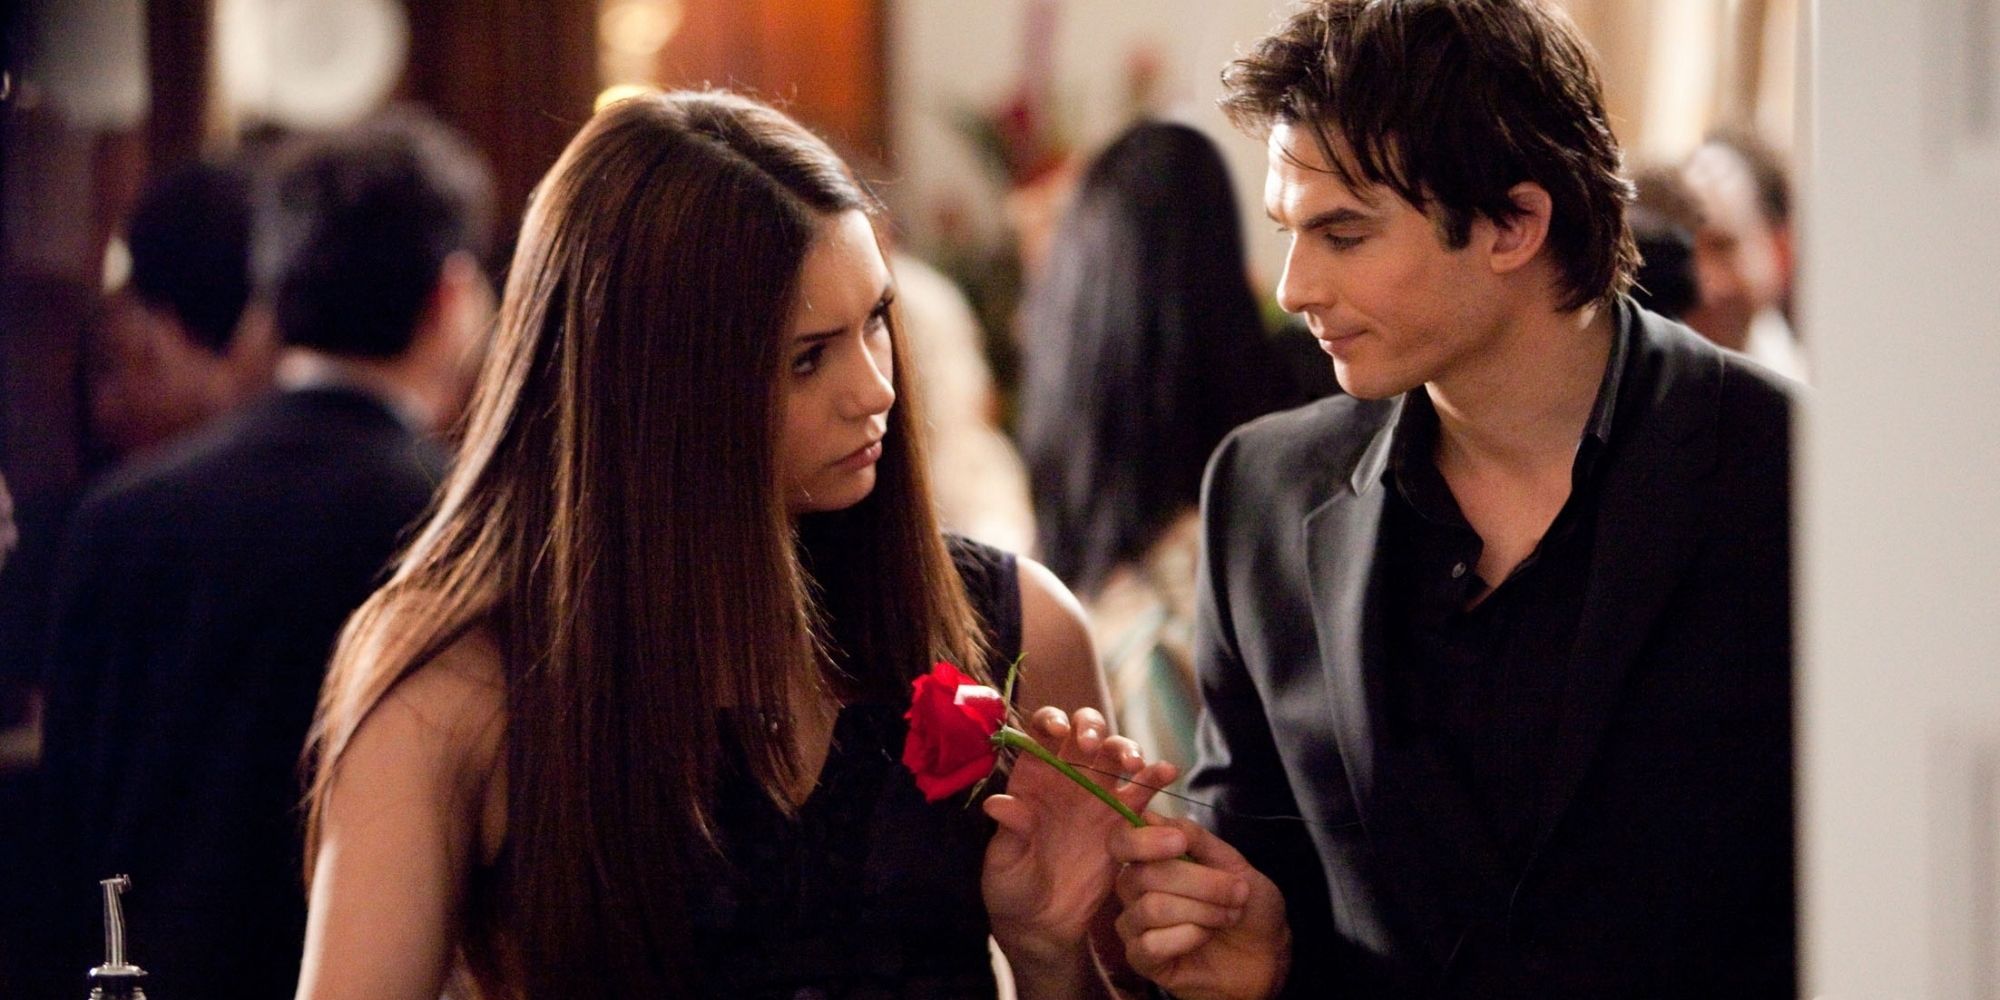 Damon gives Elena a rose in The Vampire Diaries.